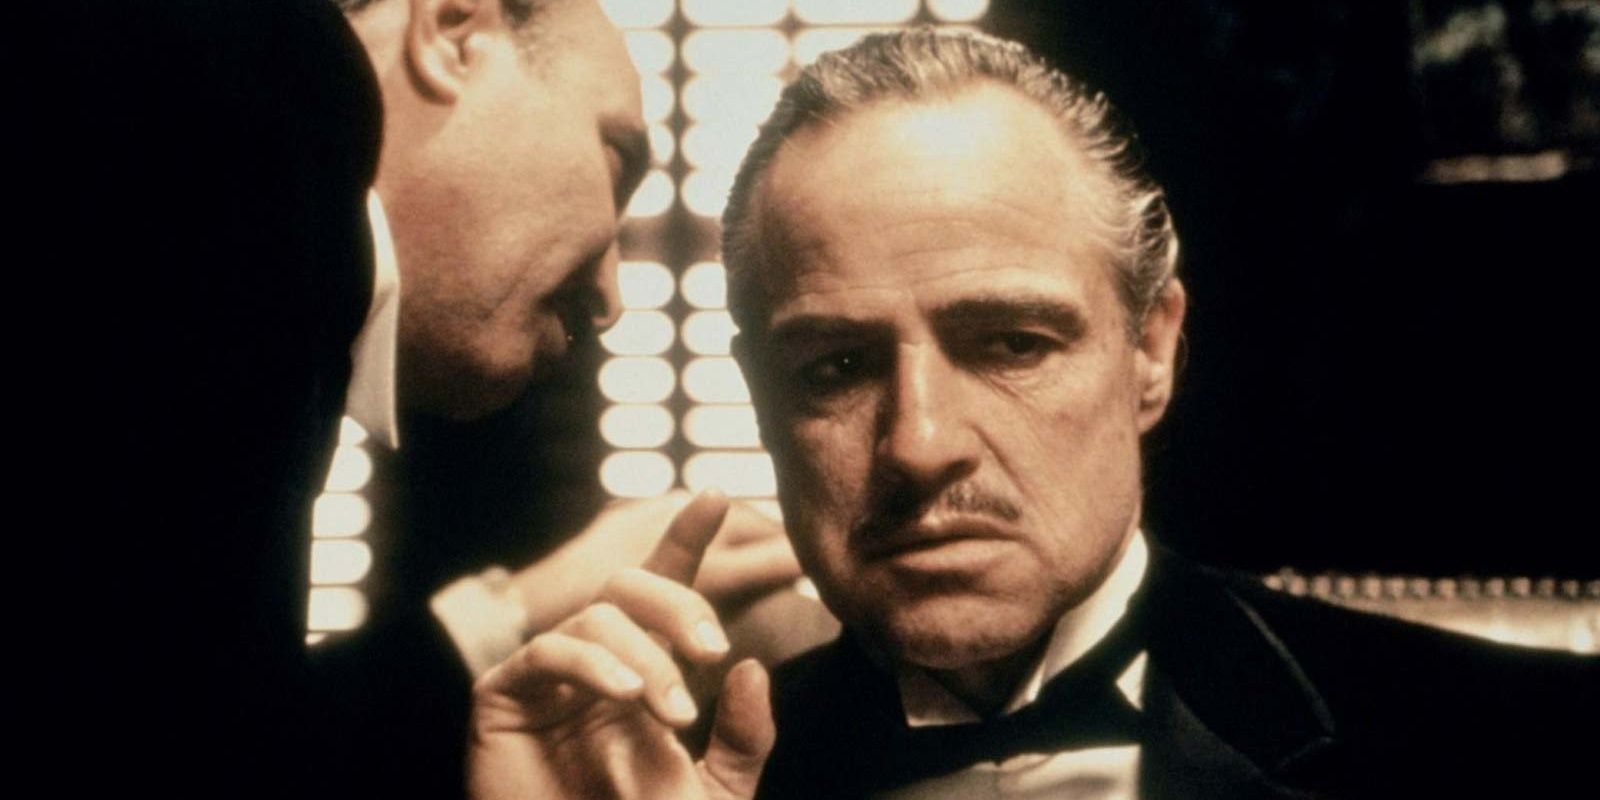 Coppola's The Godfather is widely considered one of the best films of all-time